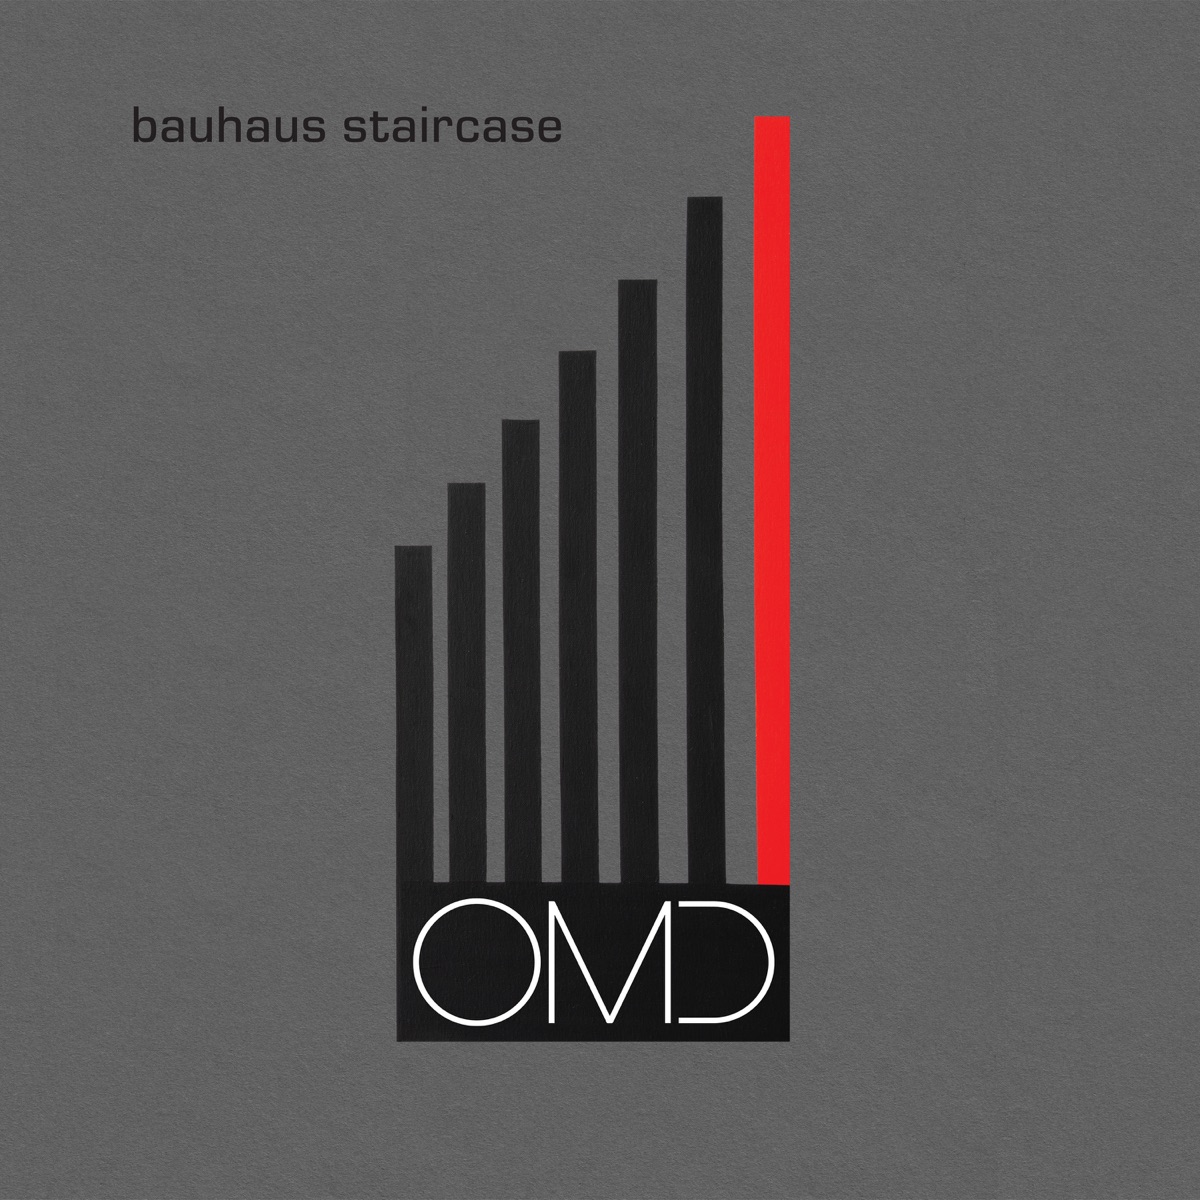 MP3: Orchestral Manoeuvres in the Dark (OMD) – Slow Train